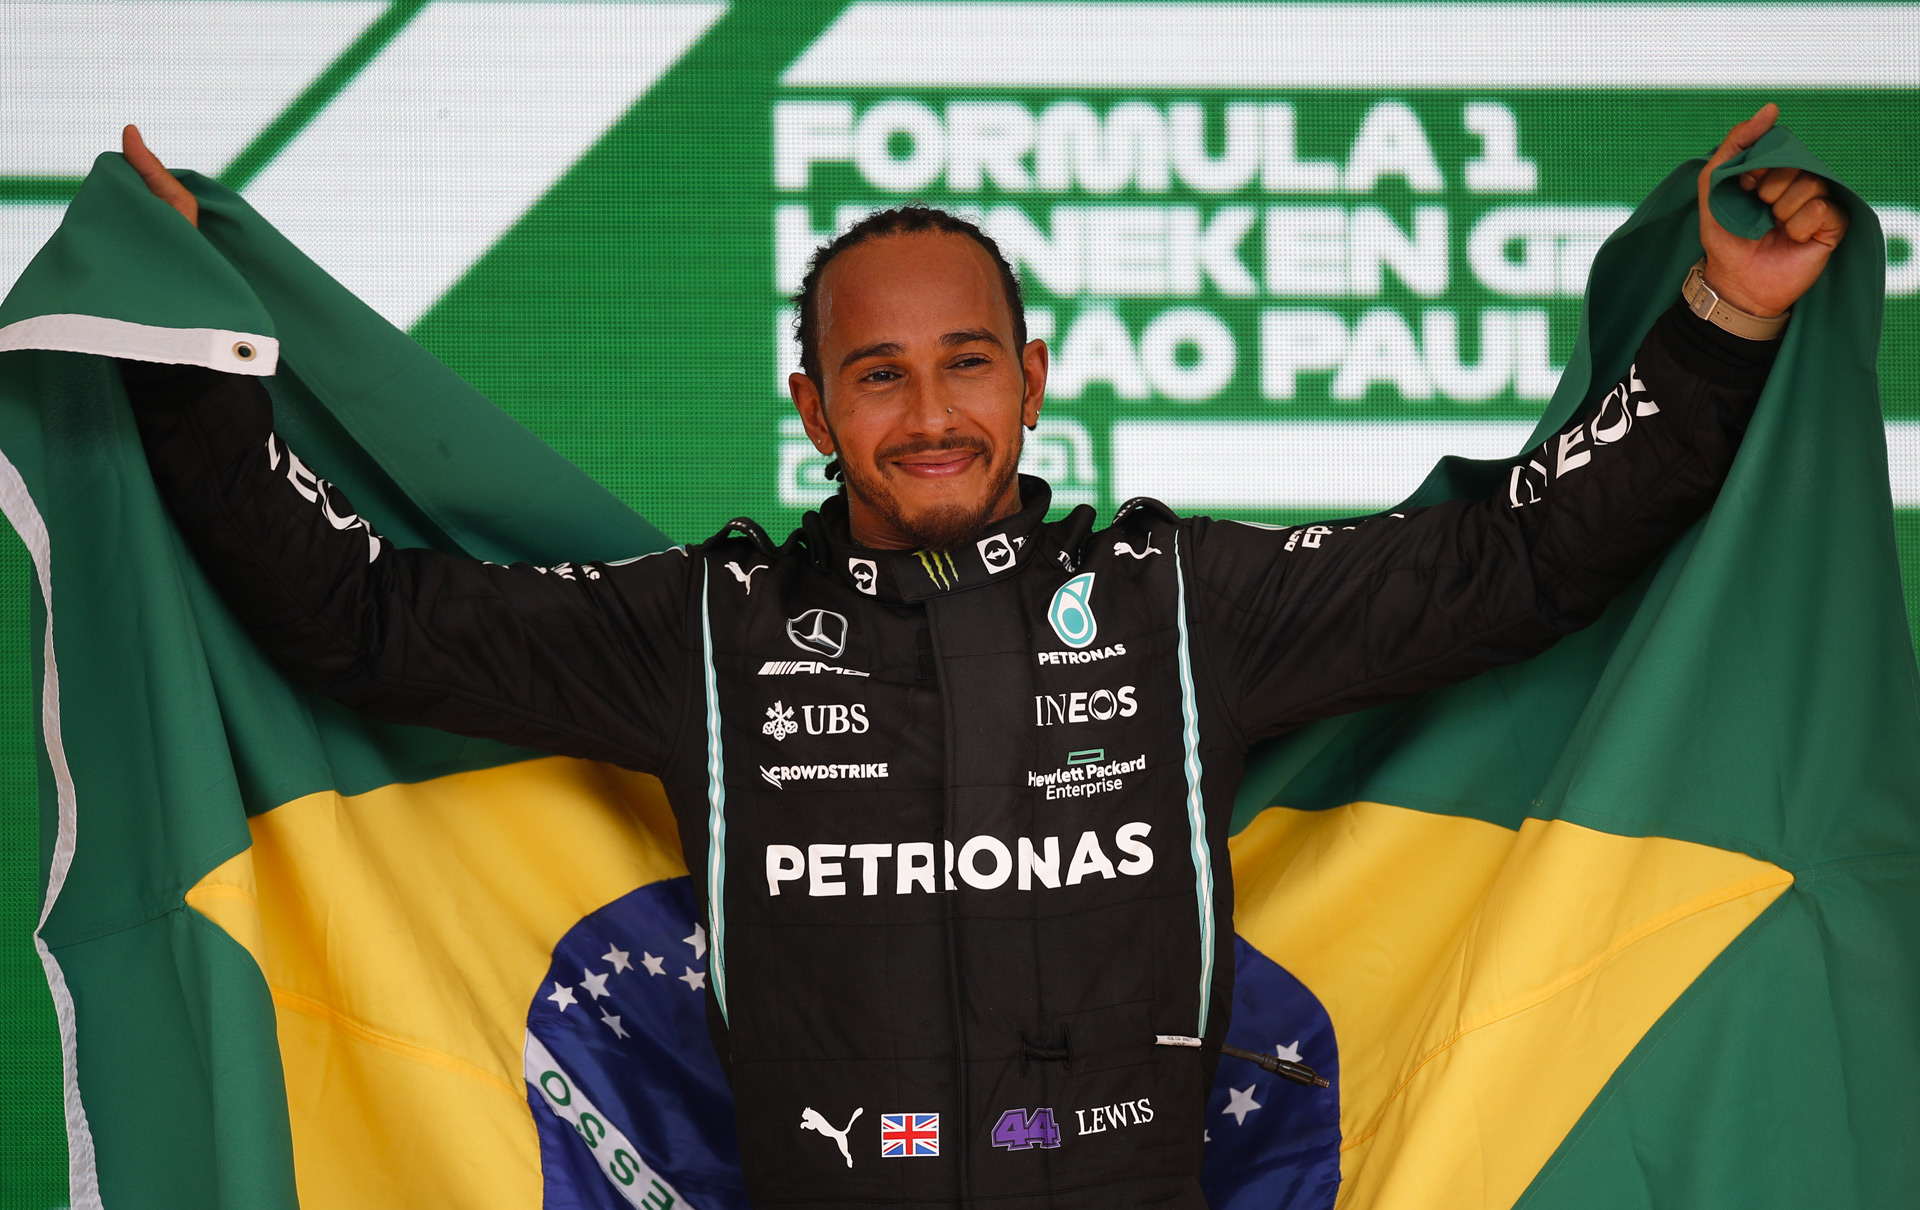 Mercedes F1 team signs Lewis Hamilton for 2 more years